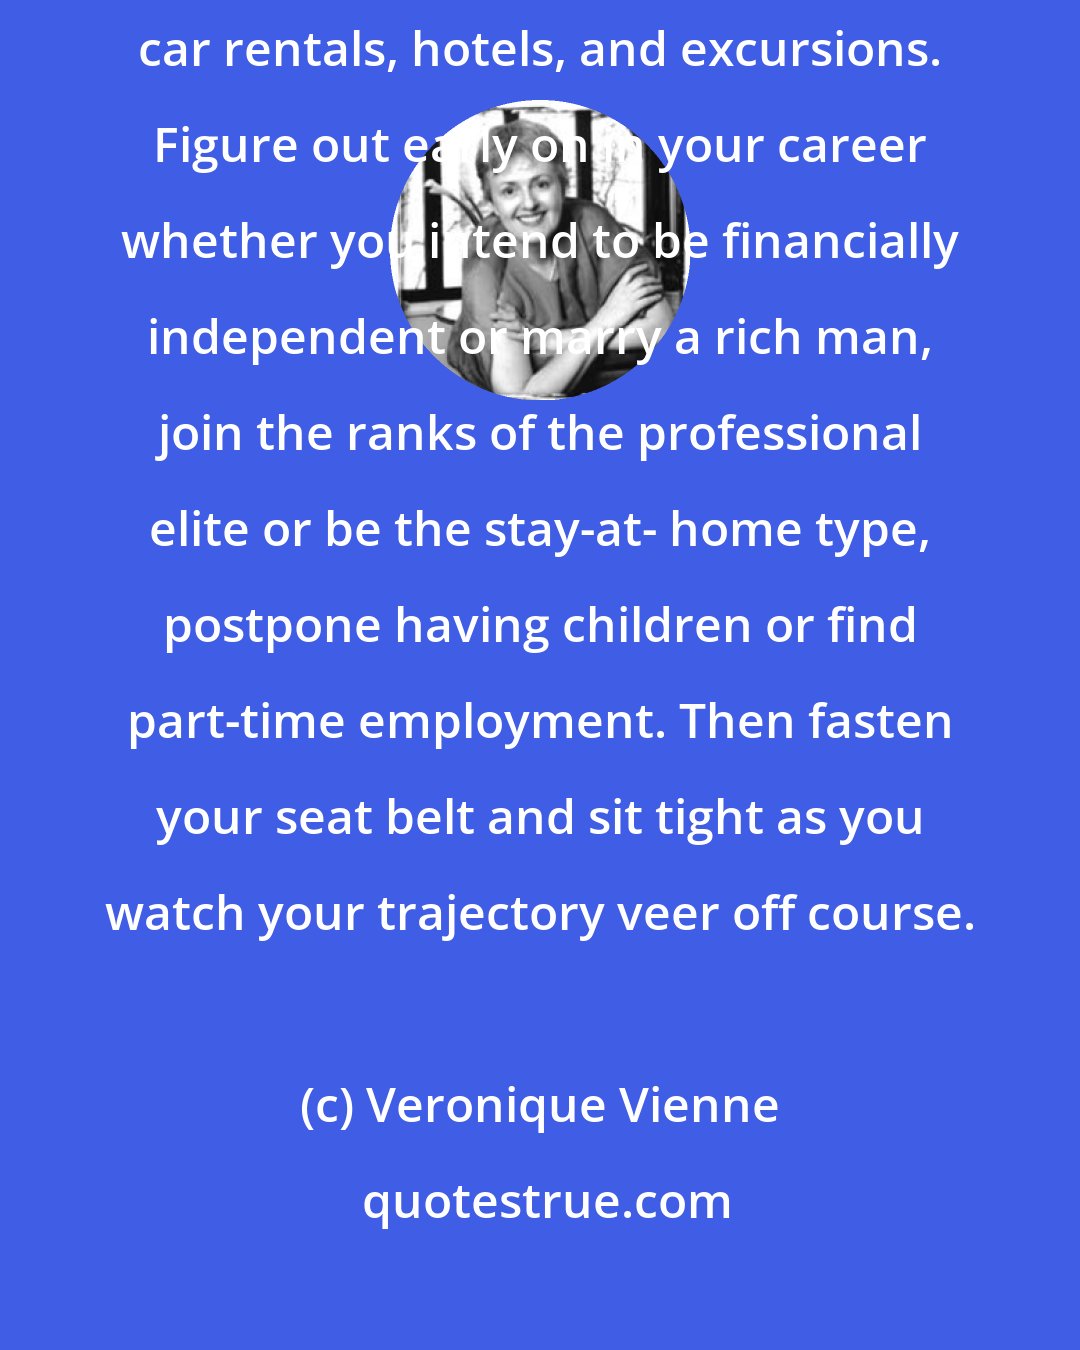 Veronique Vienne: Book your life choices in advance the same way you would book flights, car rentals, hotels, and excursions. Figure out early on in your career whether you intend to be financially independent or marry a rich man, join the ranks of the professional elite or be the stay-at- home type, postpone having children or find part-time employment. Then fasten your seat belt and sit tight as you watch your trajectory veer off course.